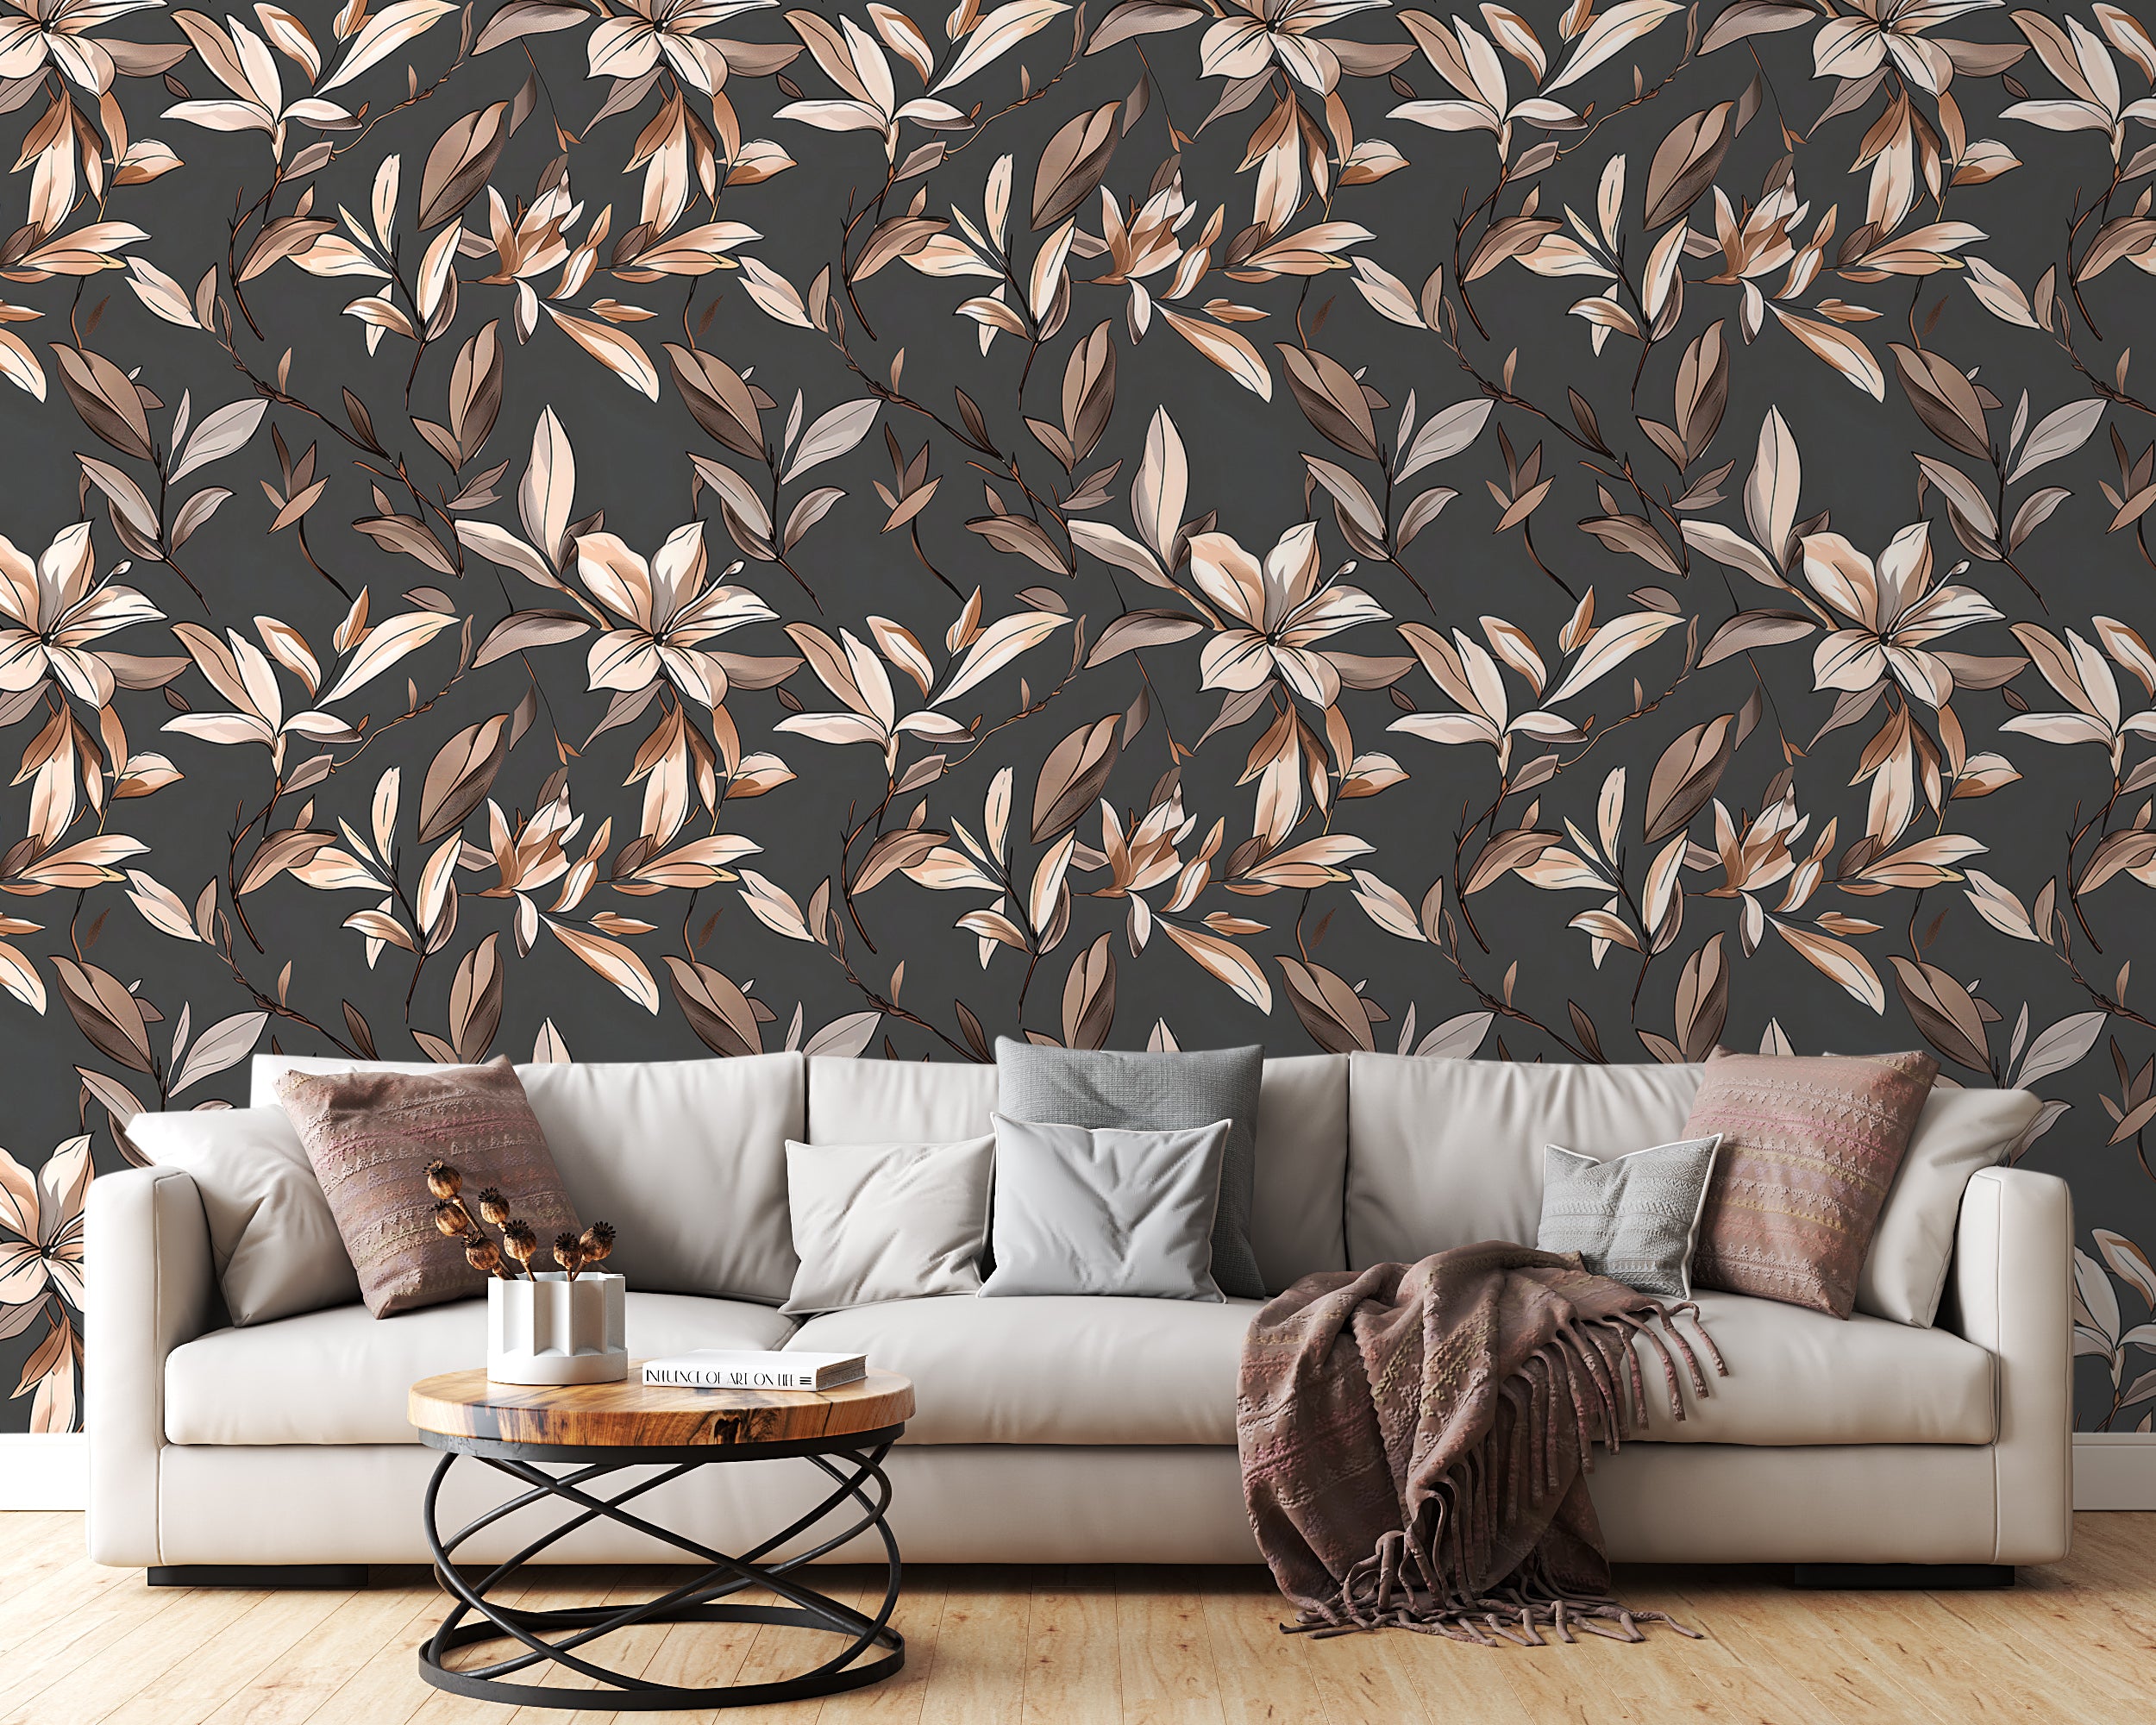 Brown and Grey Lily Flowers Wallpaper, Watercolor Dark Floral Wall Decor, Peel and Stick Botanical, Removable Beige Flower Art